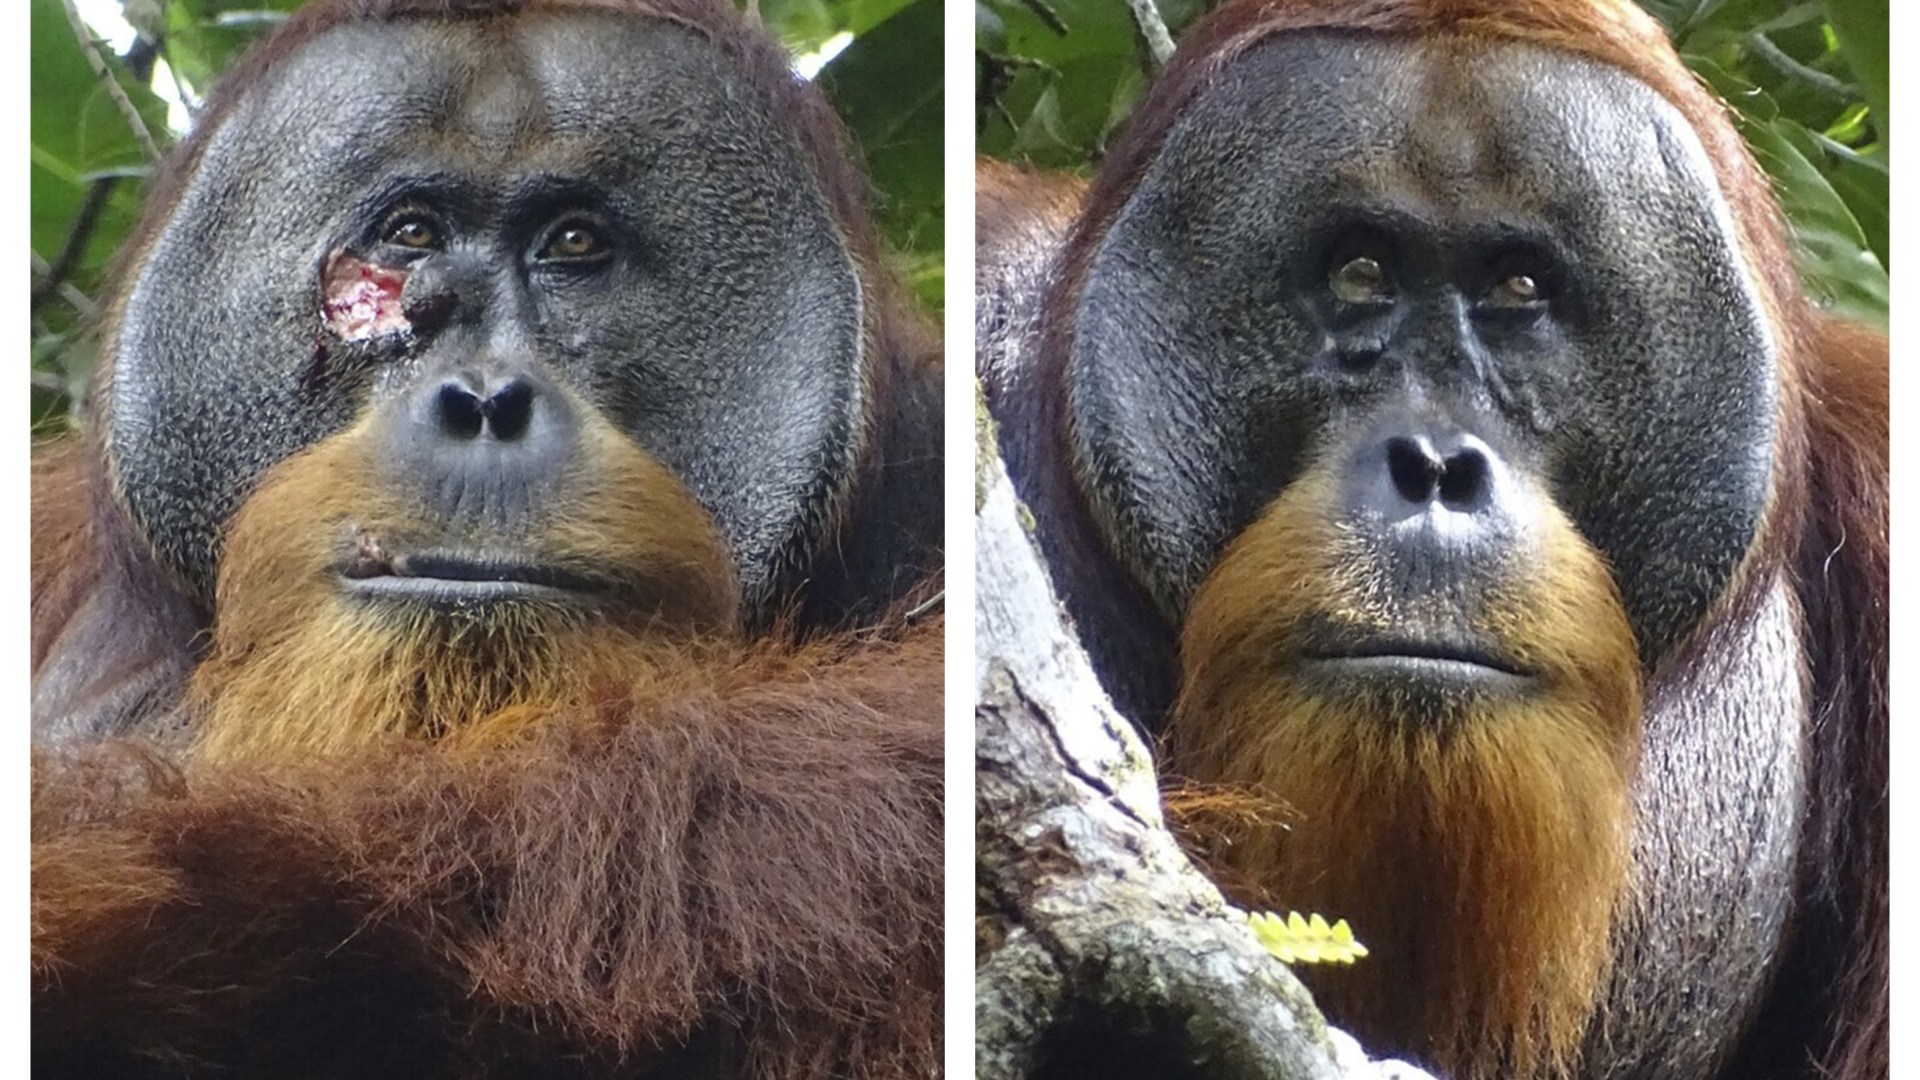 Incredible pics show how orangutan healed nasty facial wound with medicinal plant in world first [Video]